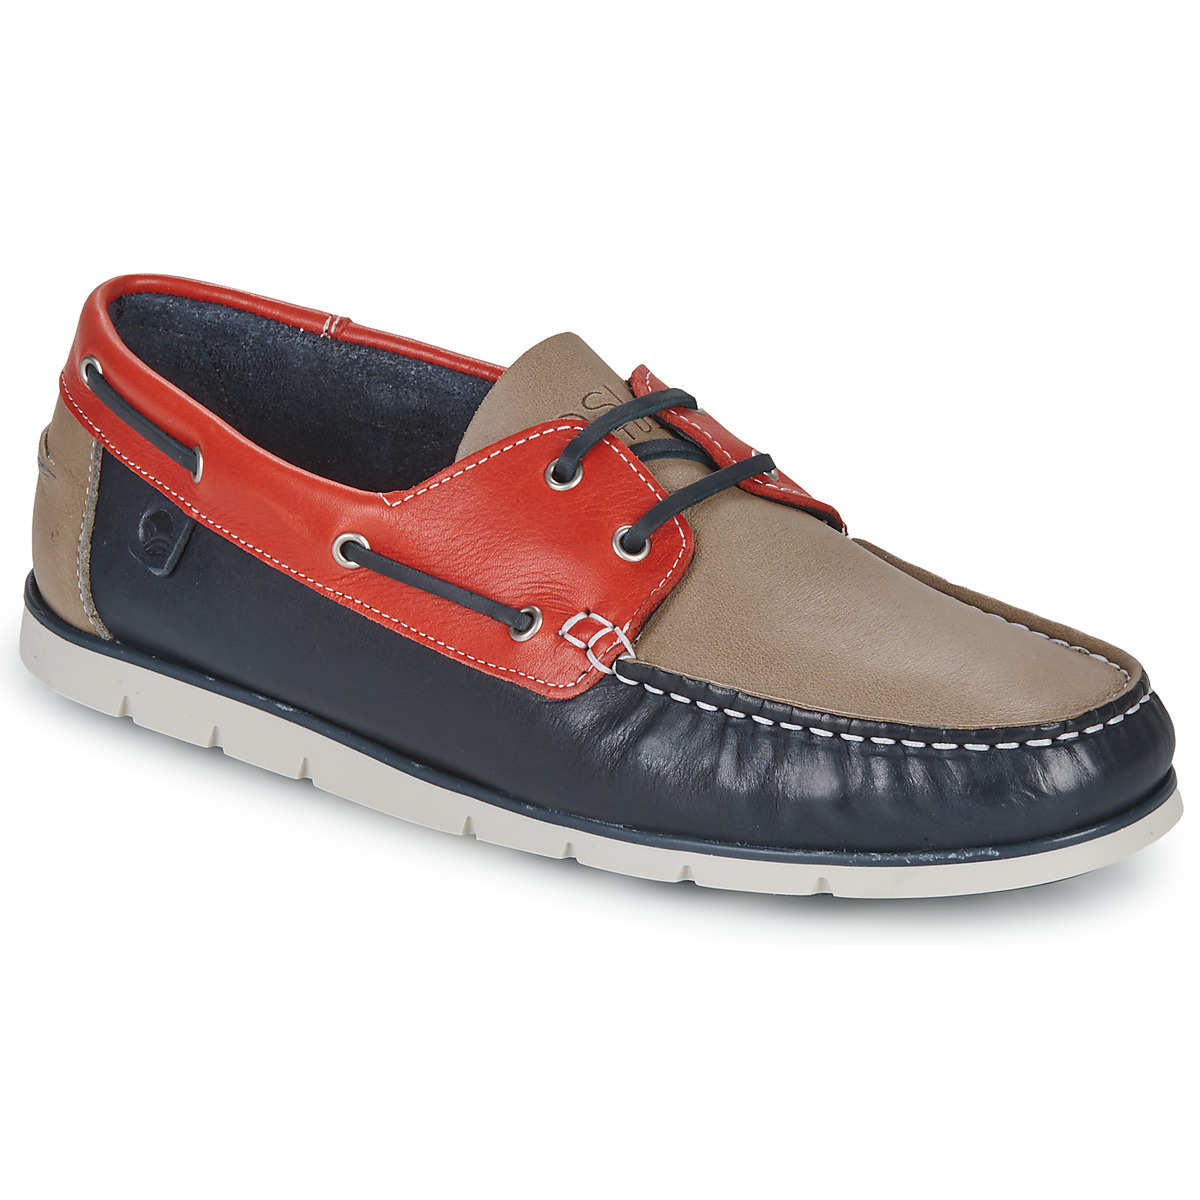 Man Red Boat Shoes - Spartoo - Casualtitude GOOFASH